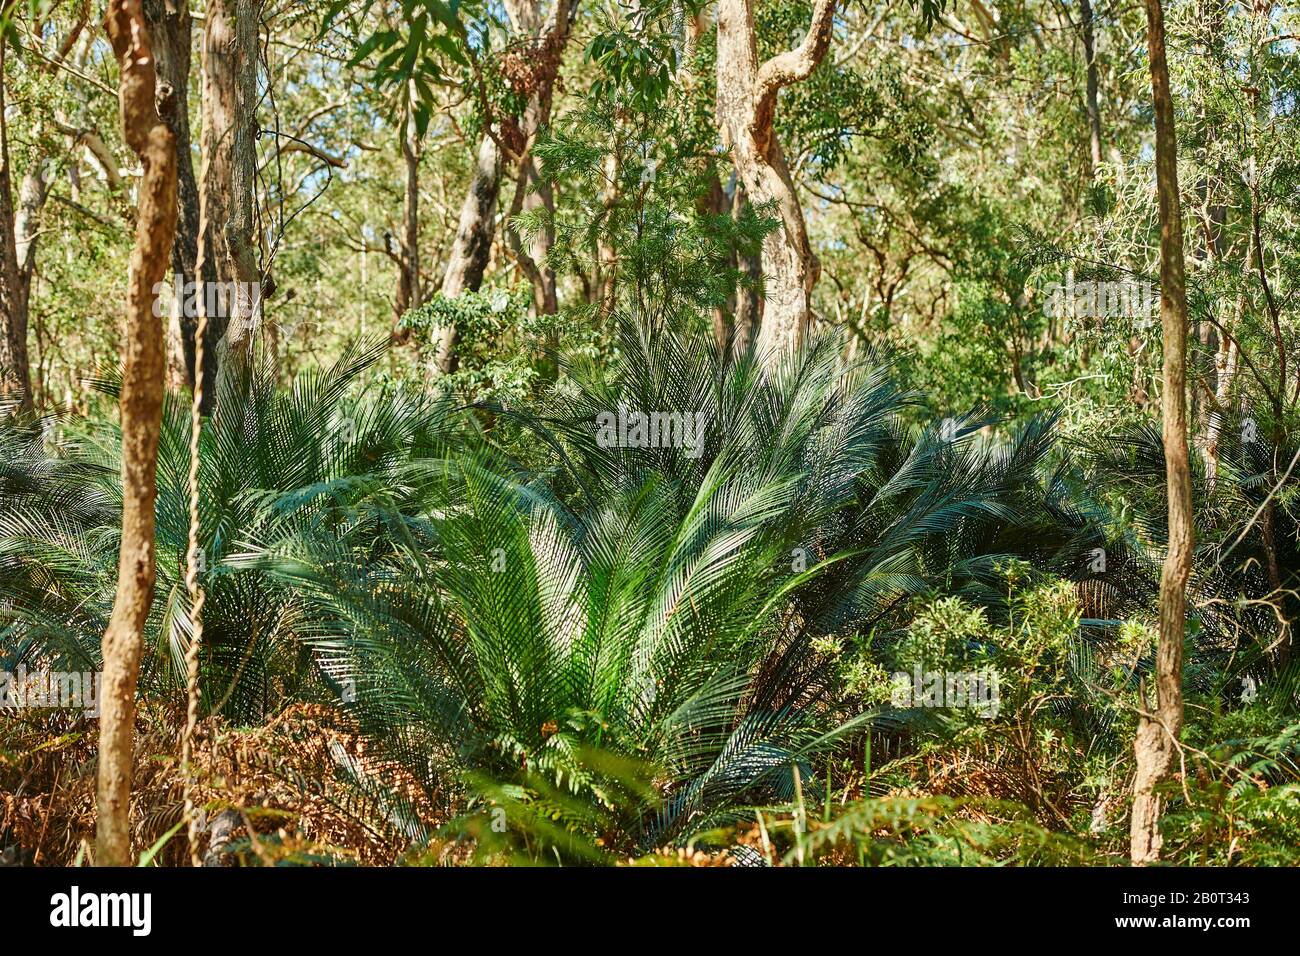 palm fern (Macrozamia macdonnellii), in a forest, Australia, New South Wales Stock Photo